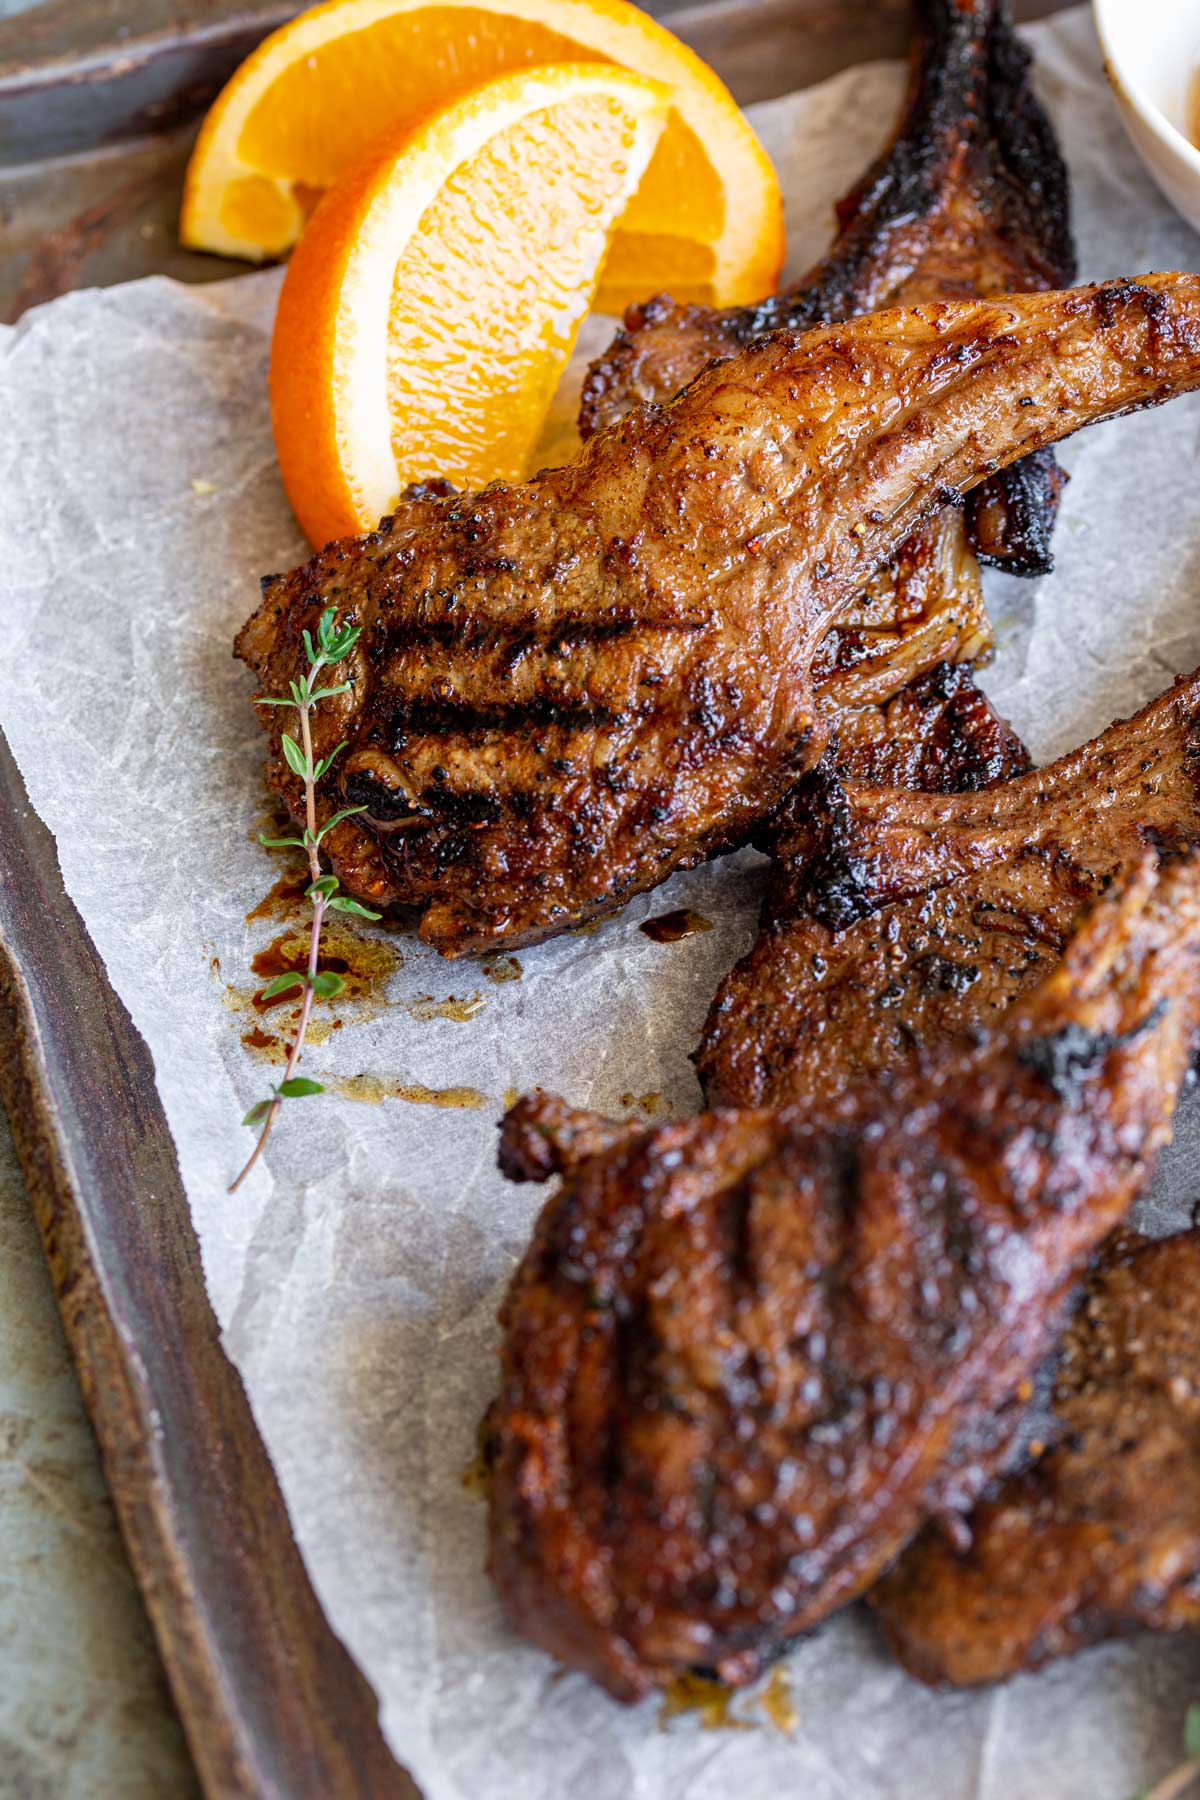 Honey Jerk lamb chops in a pile of a lined baking tray with wedges of orange